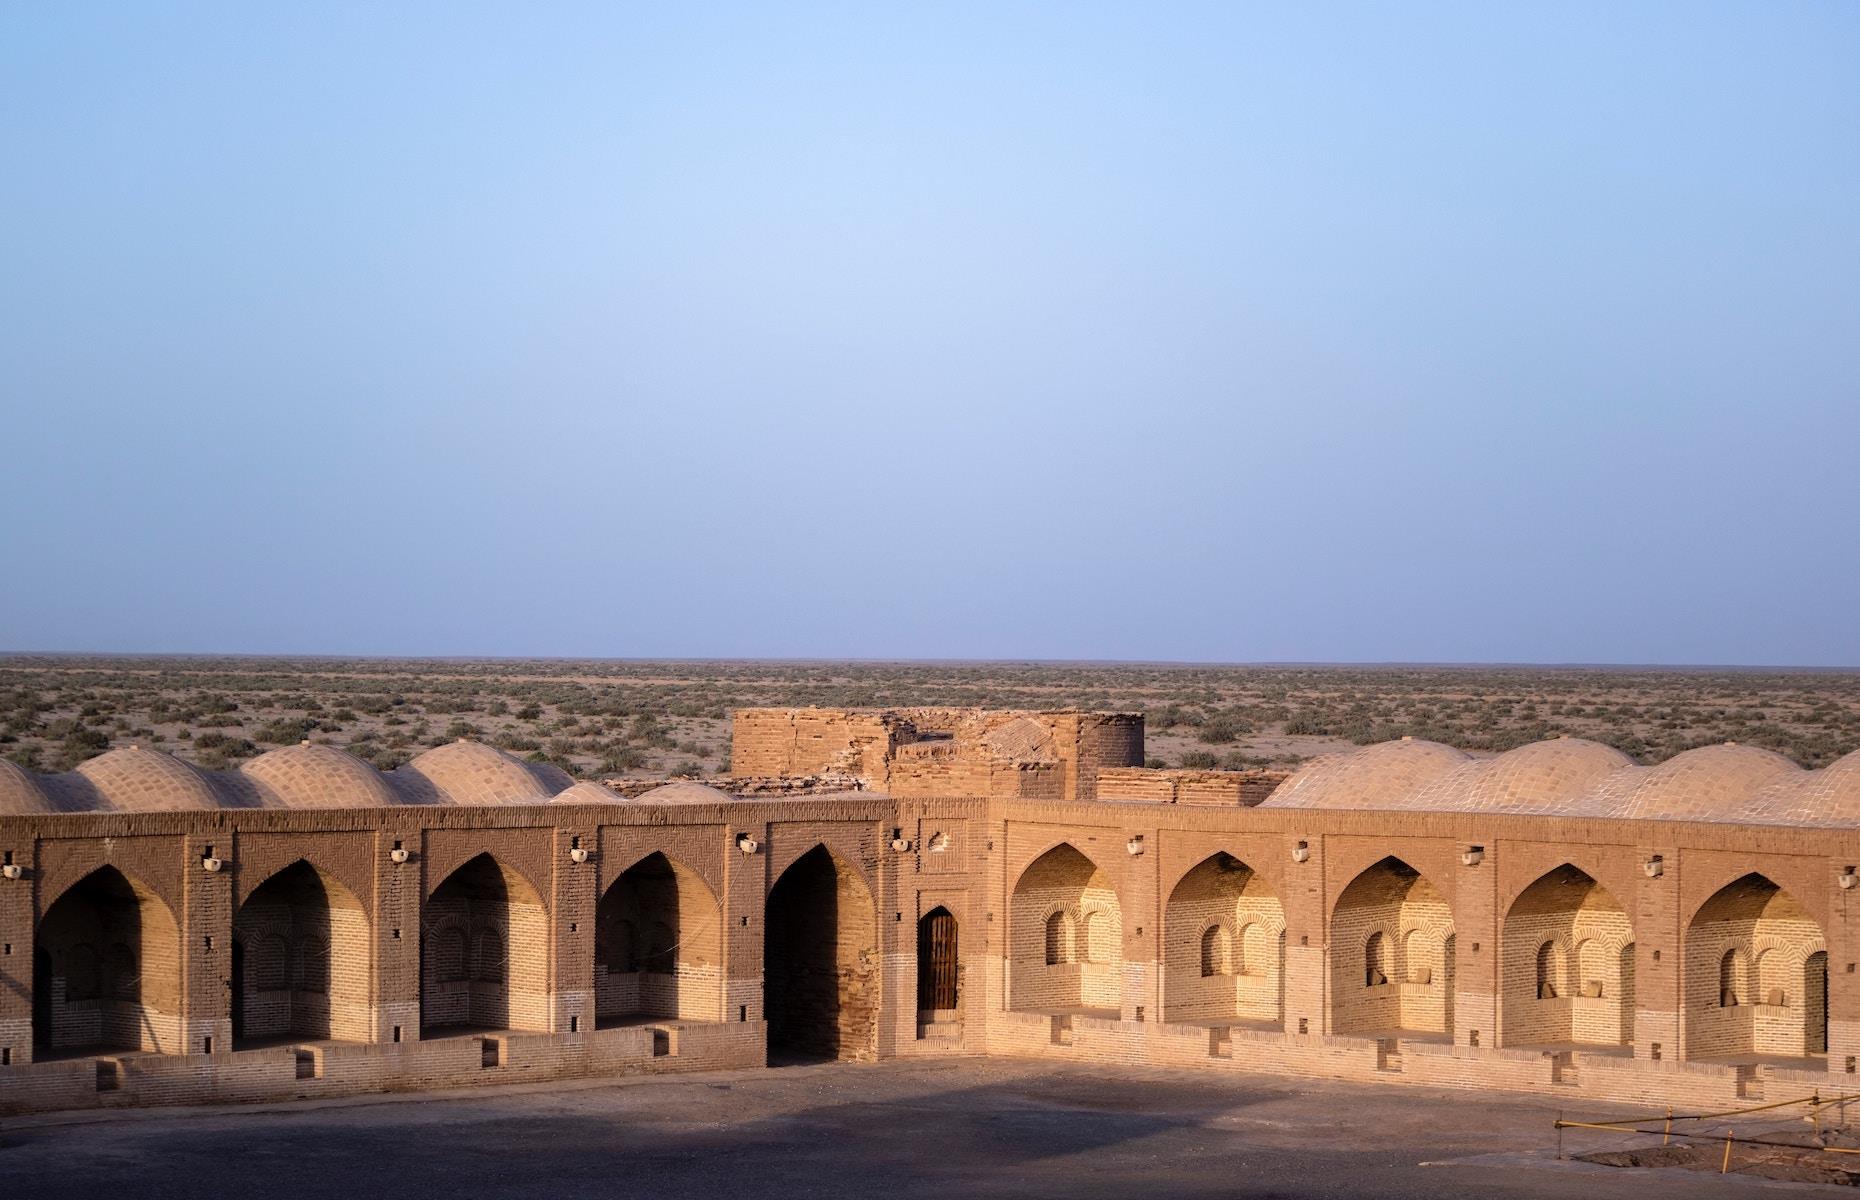 <p>This sprawling ancient inn, found in the centre of Kavir National Park in Qom province, was likely first constructed in the Sassanid era (AD 224–651) along the ancient trade route between Rey and Qom. Deir-e Gachin is one of many <em>caravansaries</em> that pepper the Iranian desert but it’s one of the largest and oldest. It was restored during the Safavid dynasty (16th-18th centuries) when <em>caravansaries</em> flourished along the Silk Road to provide refuge to travellers and traders. Centered around a huge courtyard, the vast structure includes a mosque, stone mill, bathhouse, prayer hall and two wells.</p>